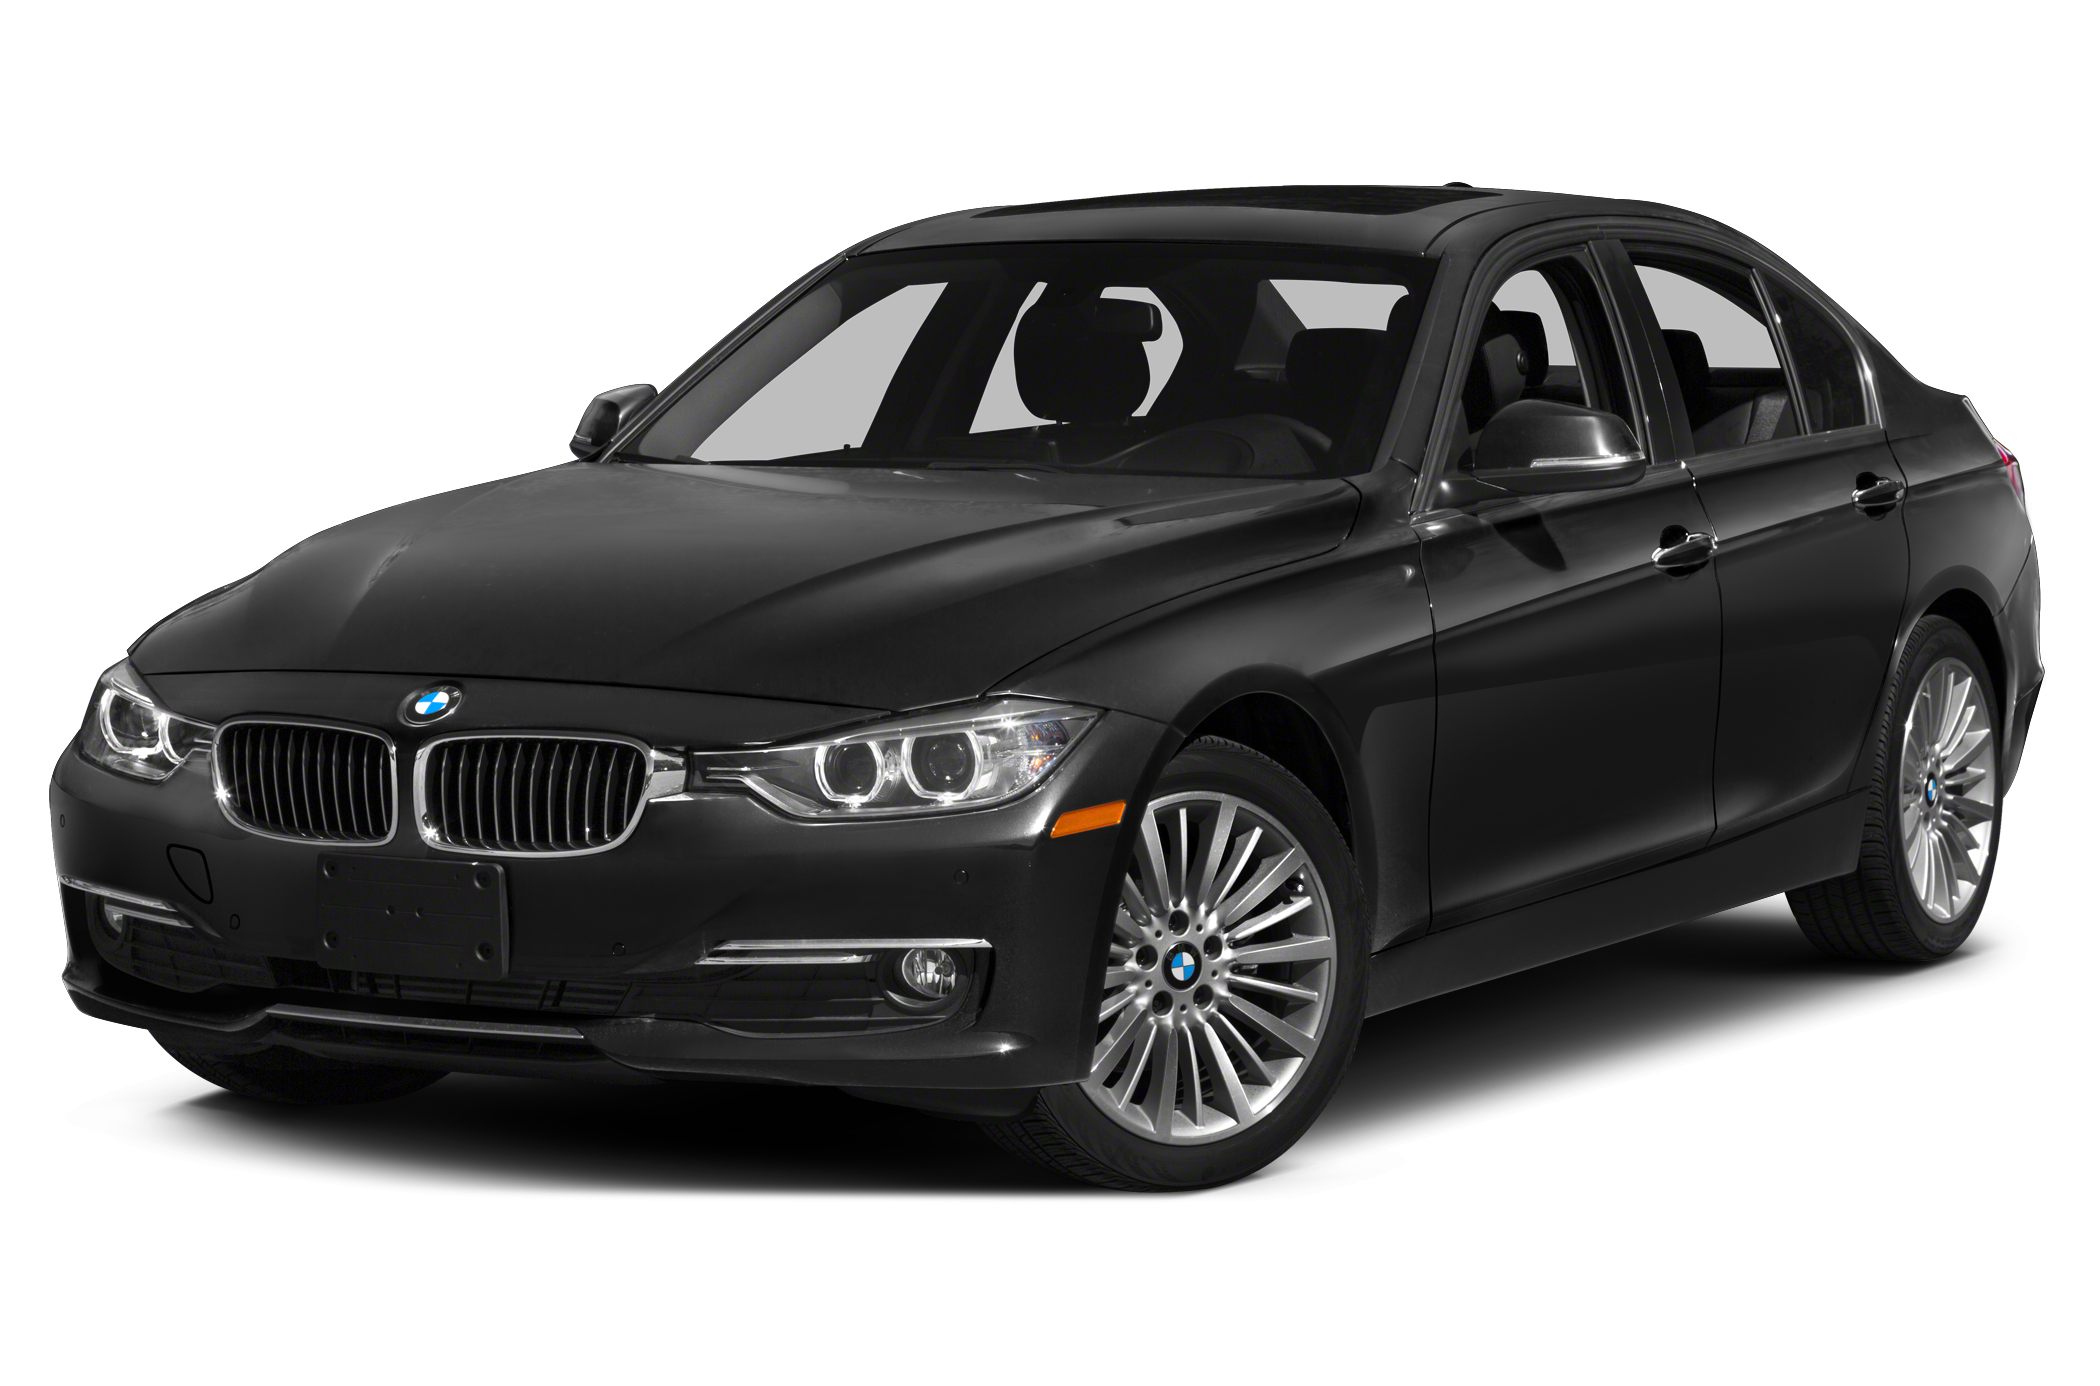 Used bmw for sale in sacramento ca #4